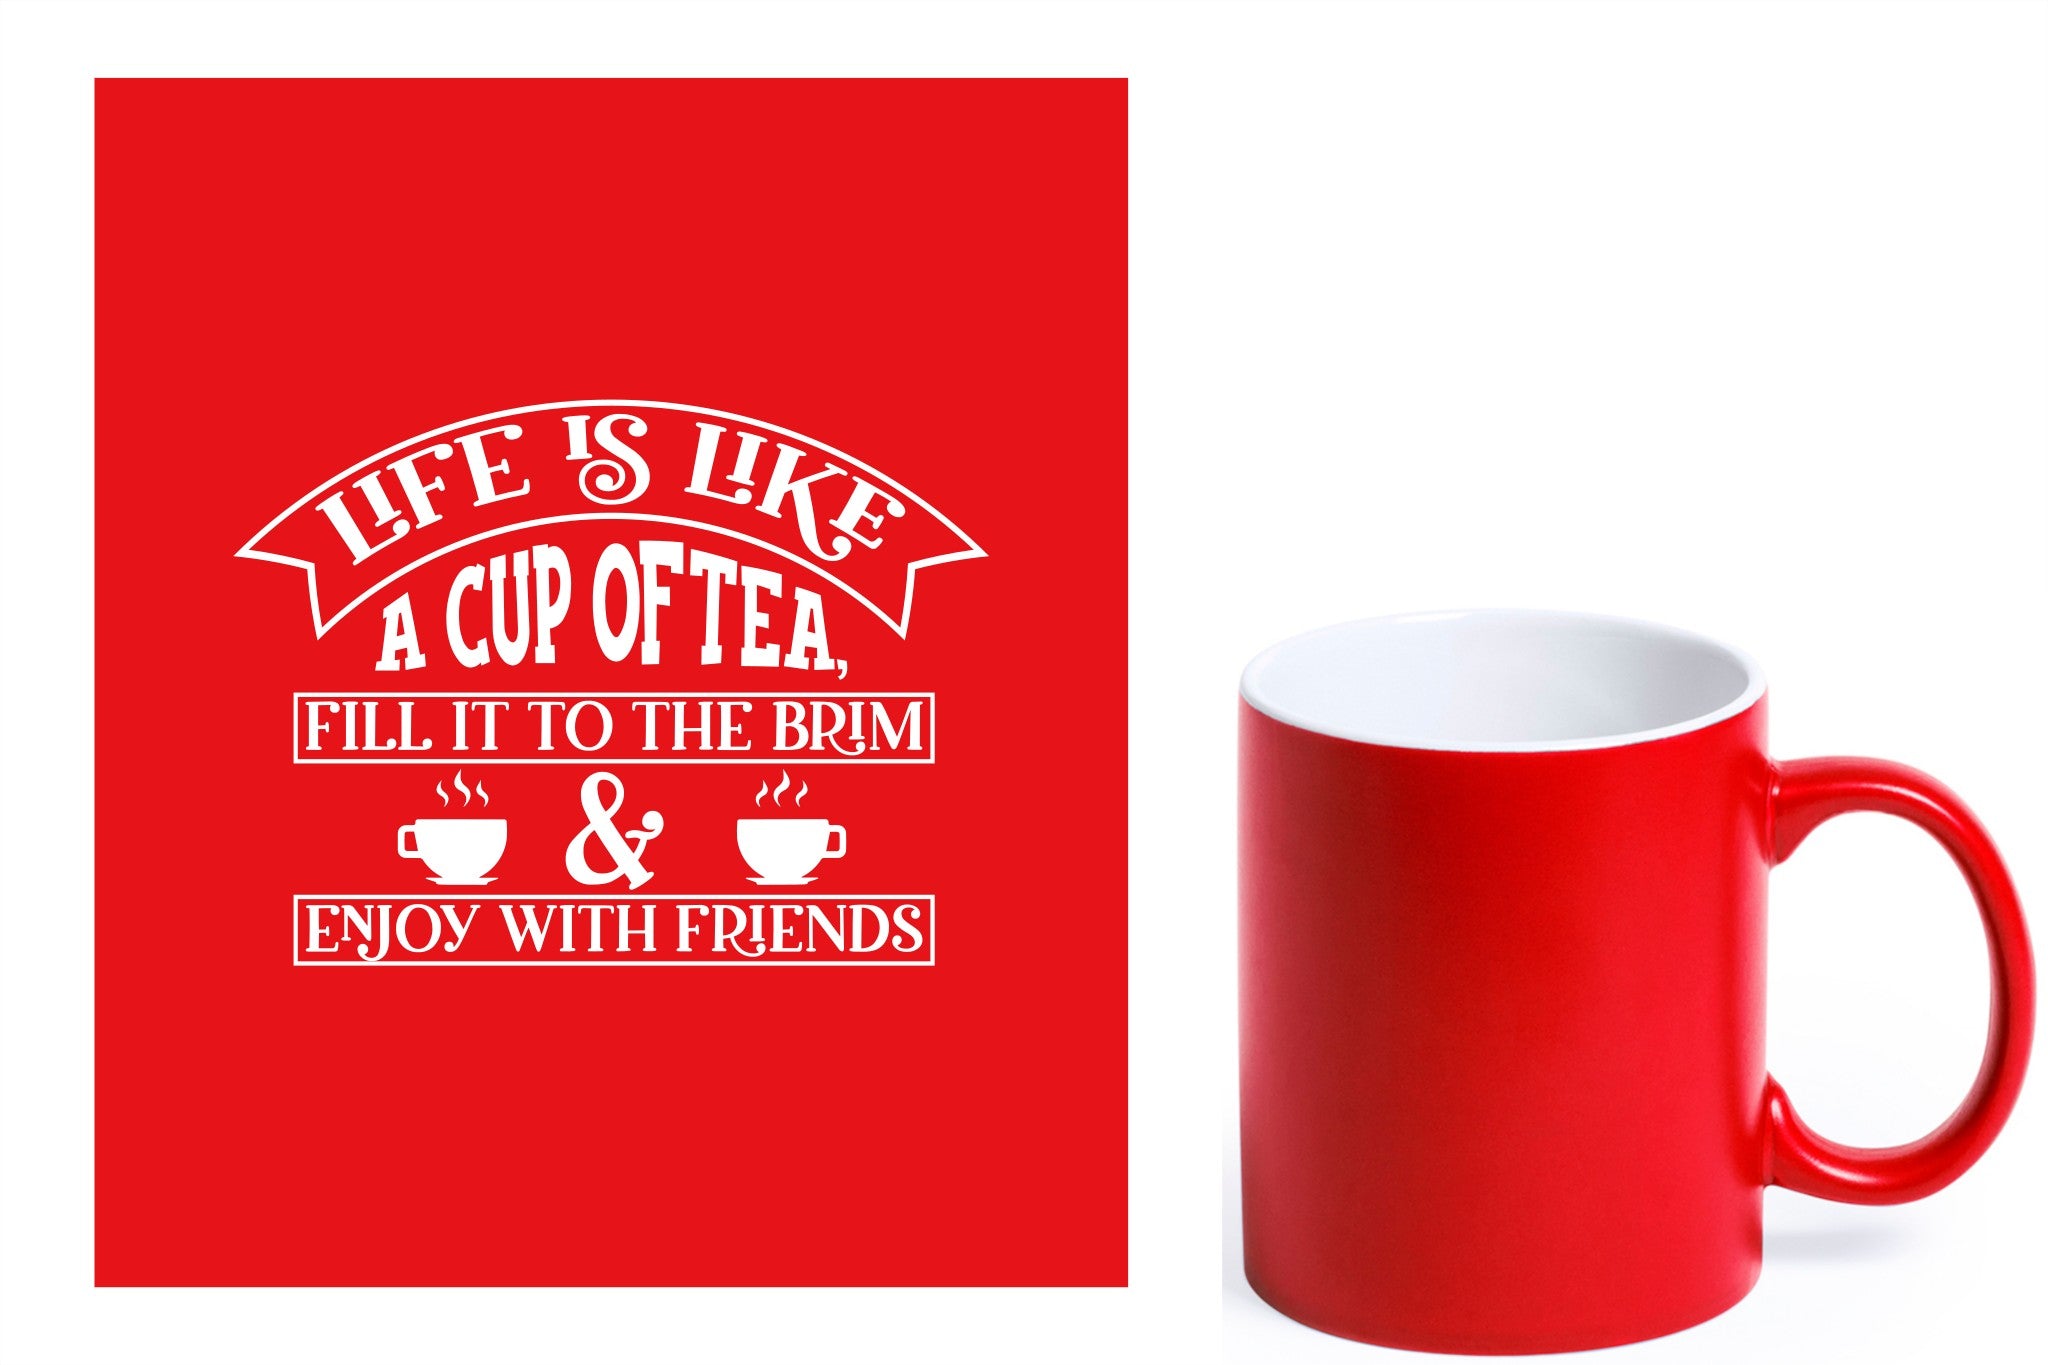 rode keramische mok met witte gravure  'Life is like a cup of tea fill it to the brim & enjoy with friends'.